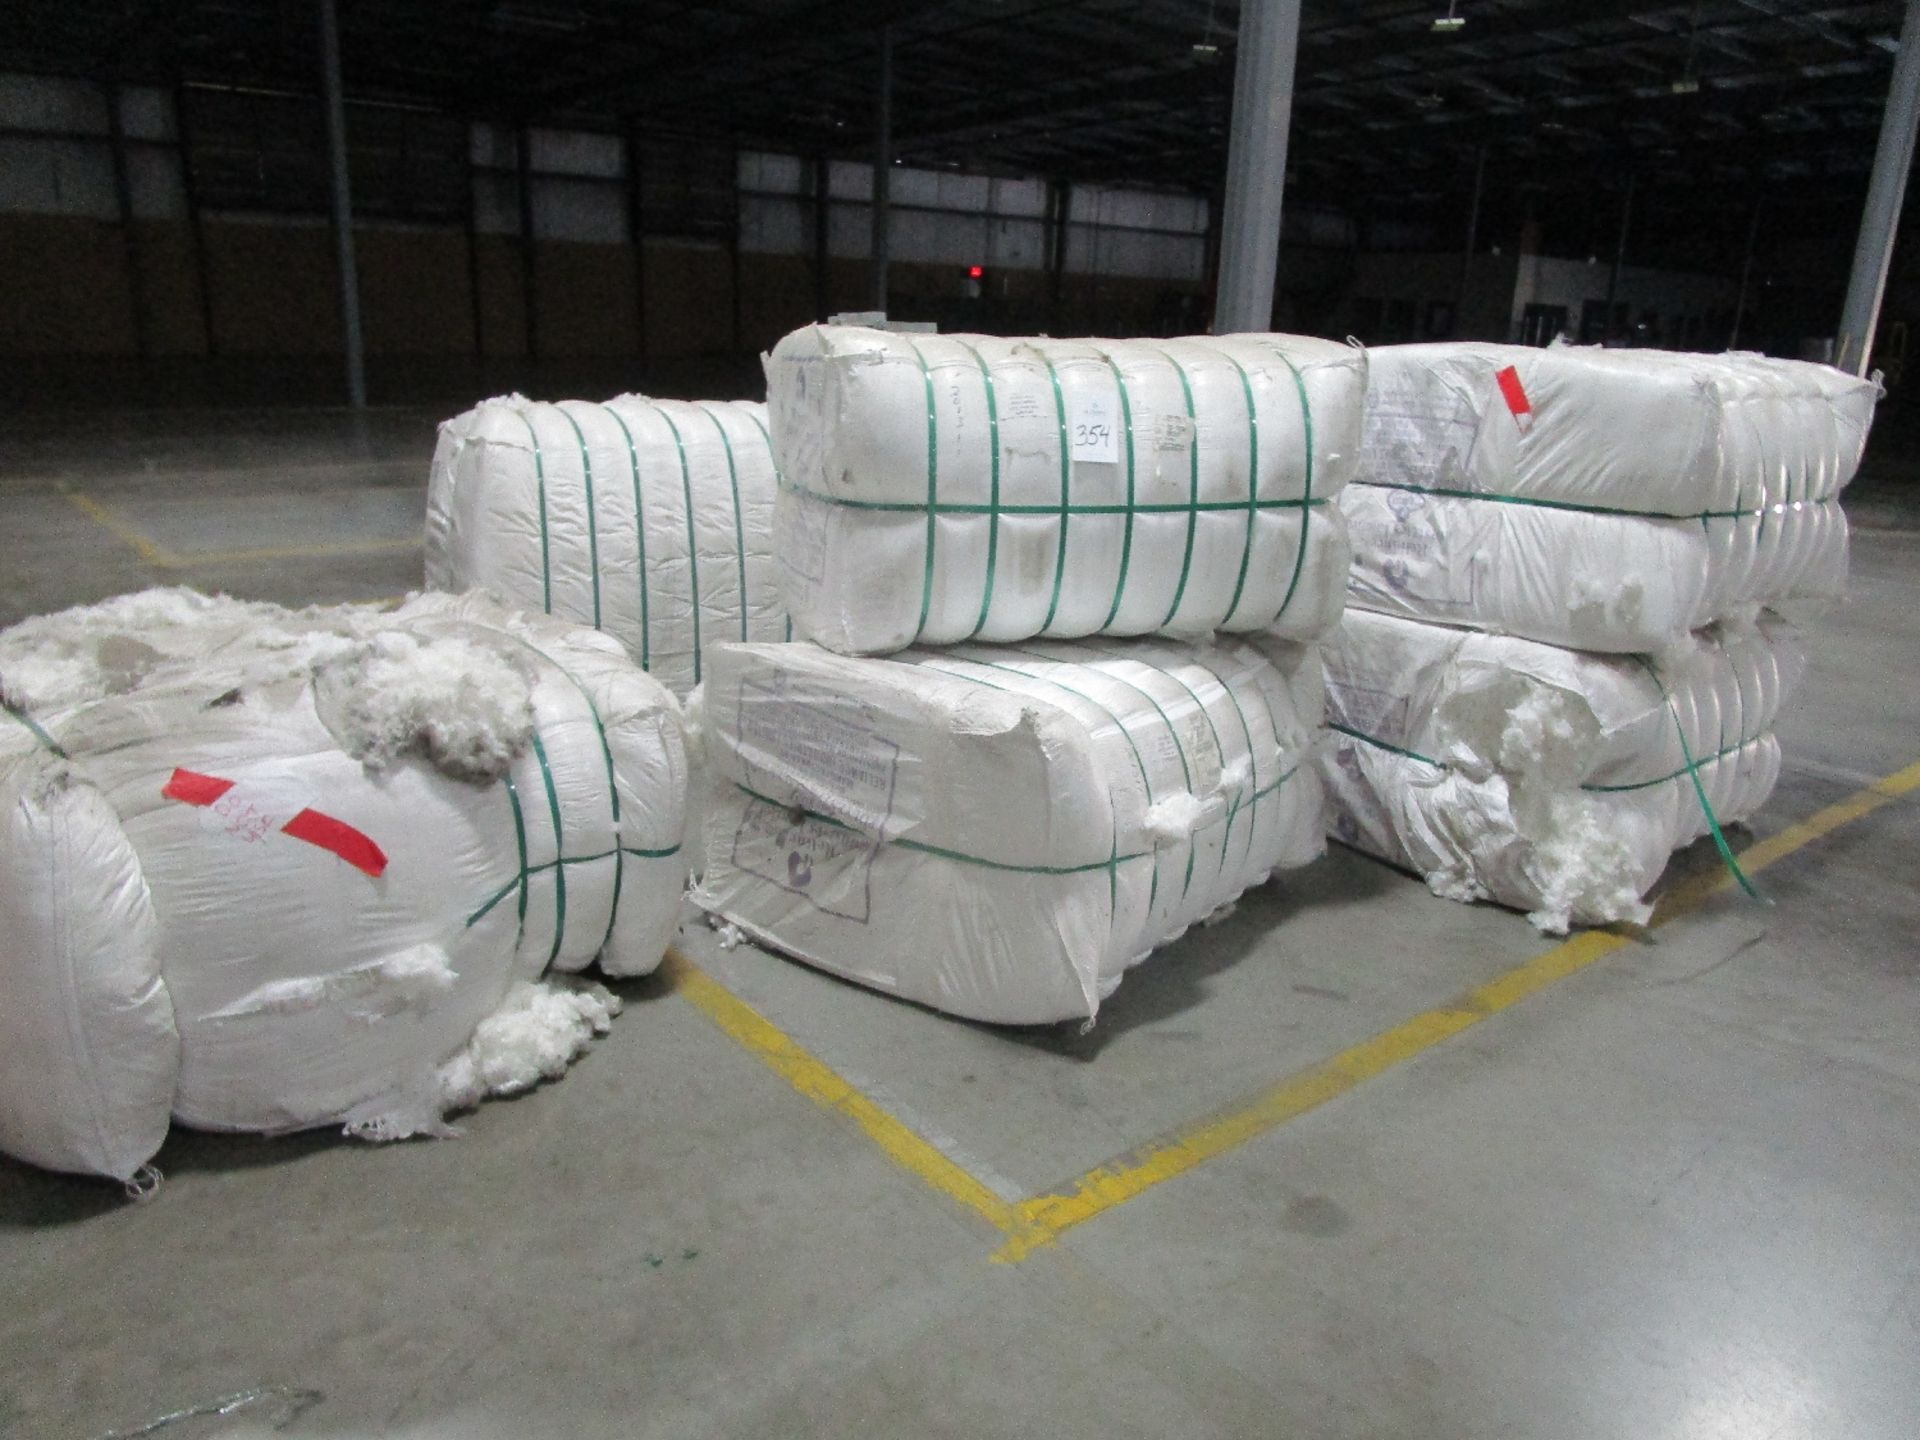 Reliance Industries 42512 Poly Fill Bales